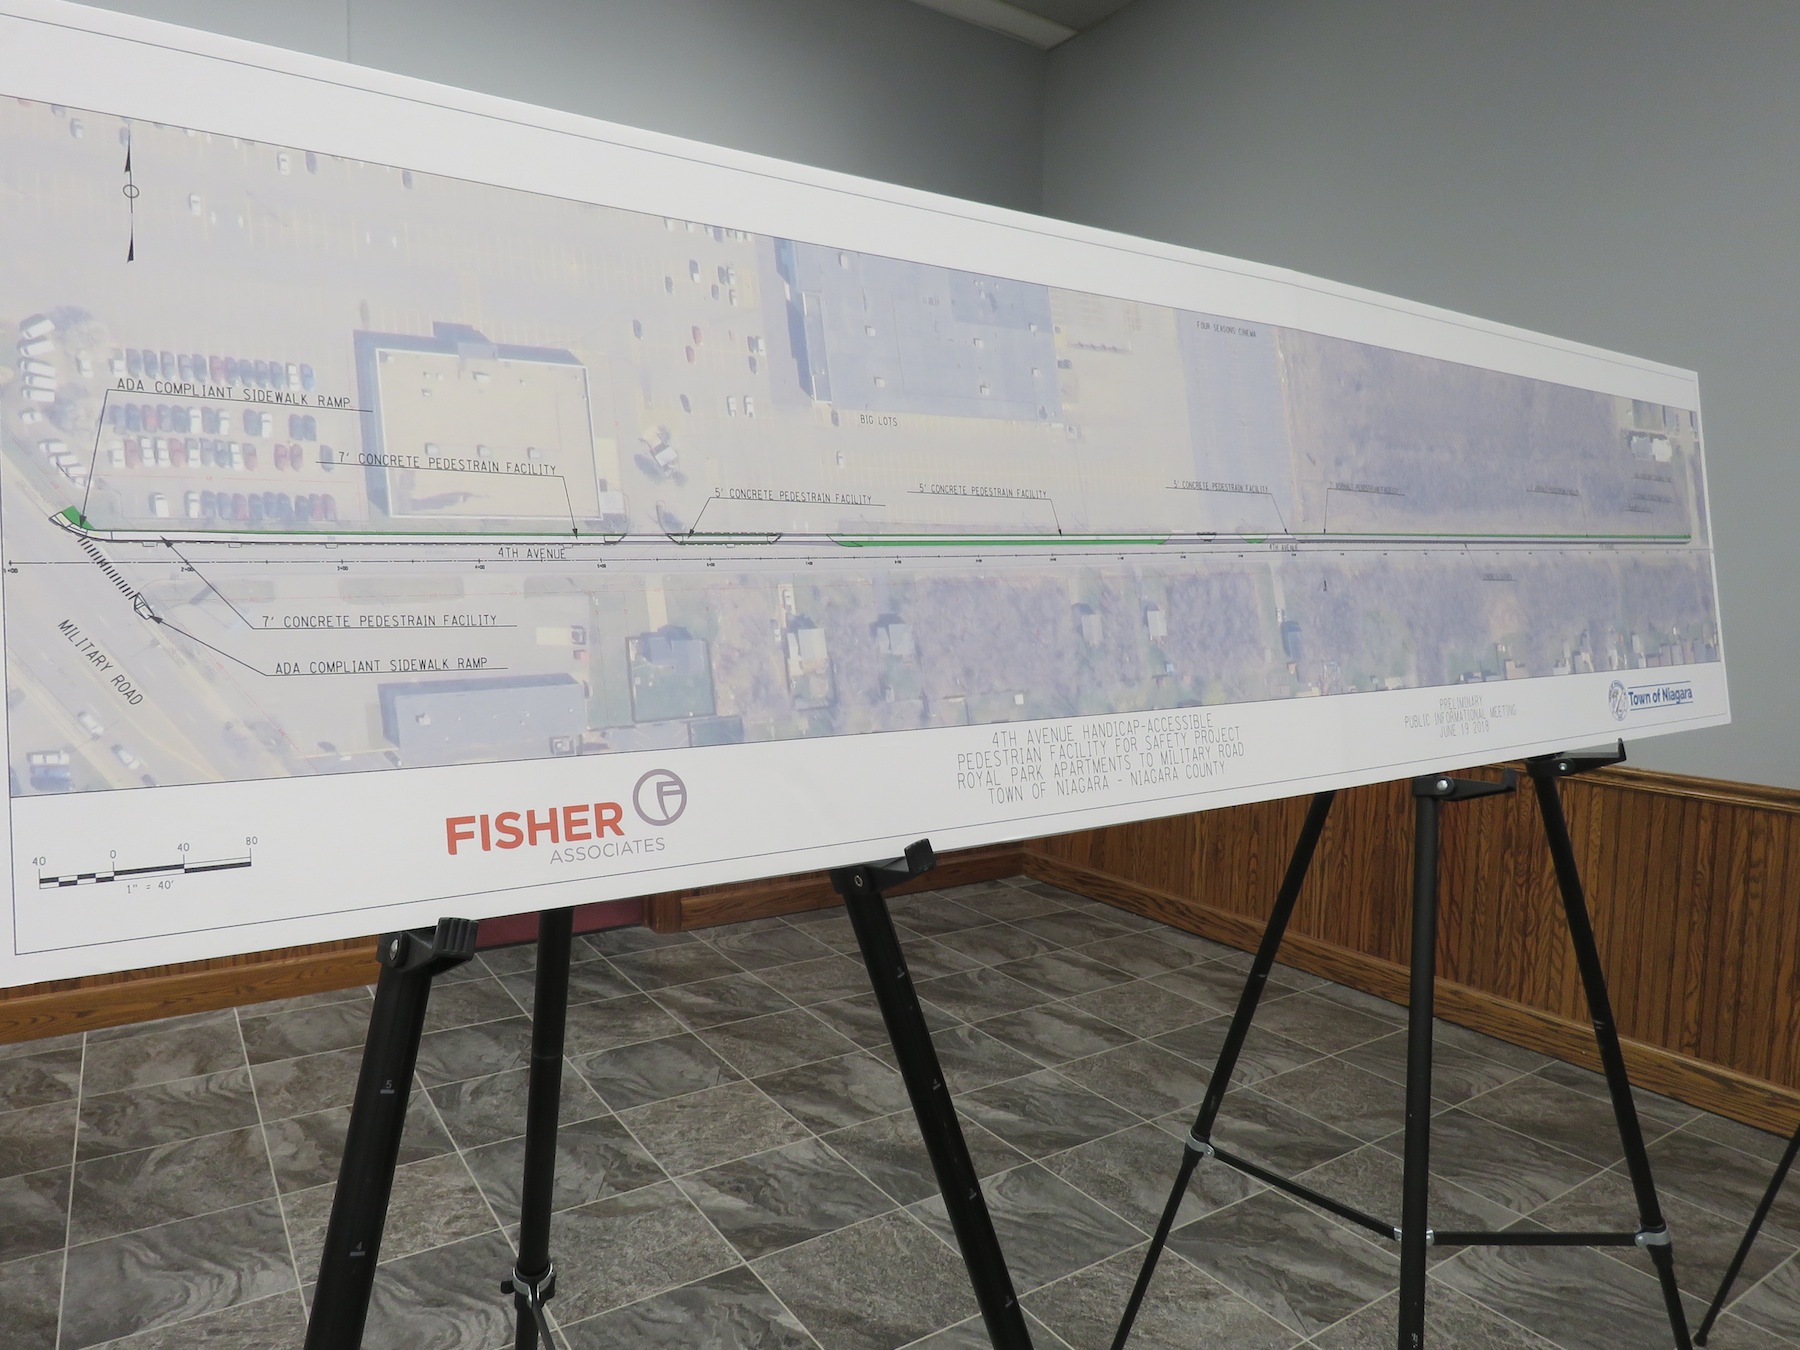 The Fourth Avenue pathway broken down on a design by Fisher Associates. (Photo by David Yarger)